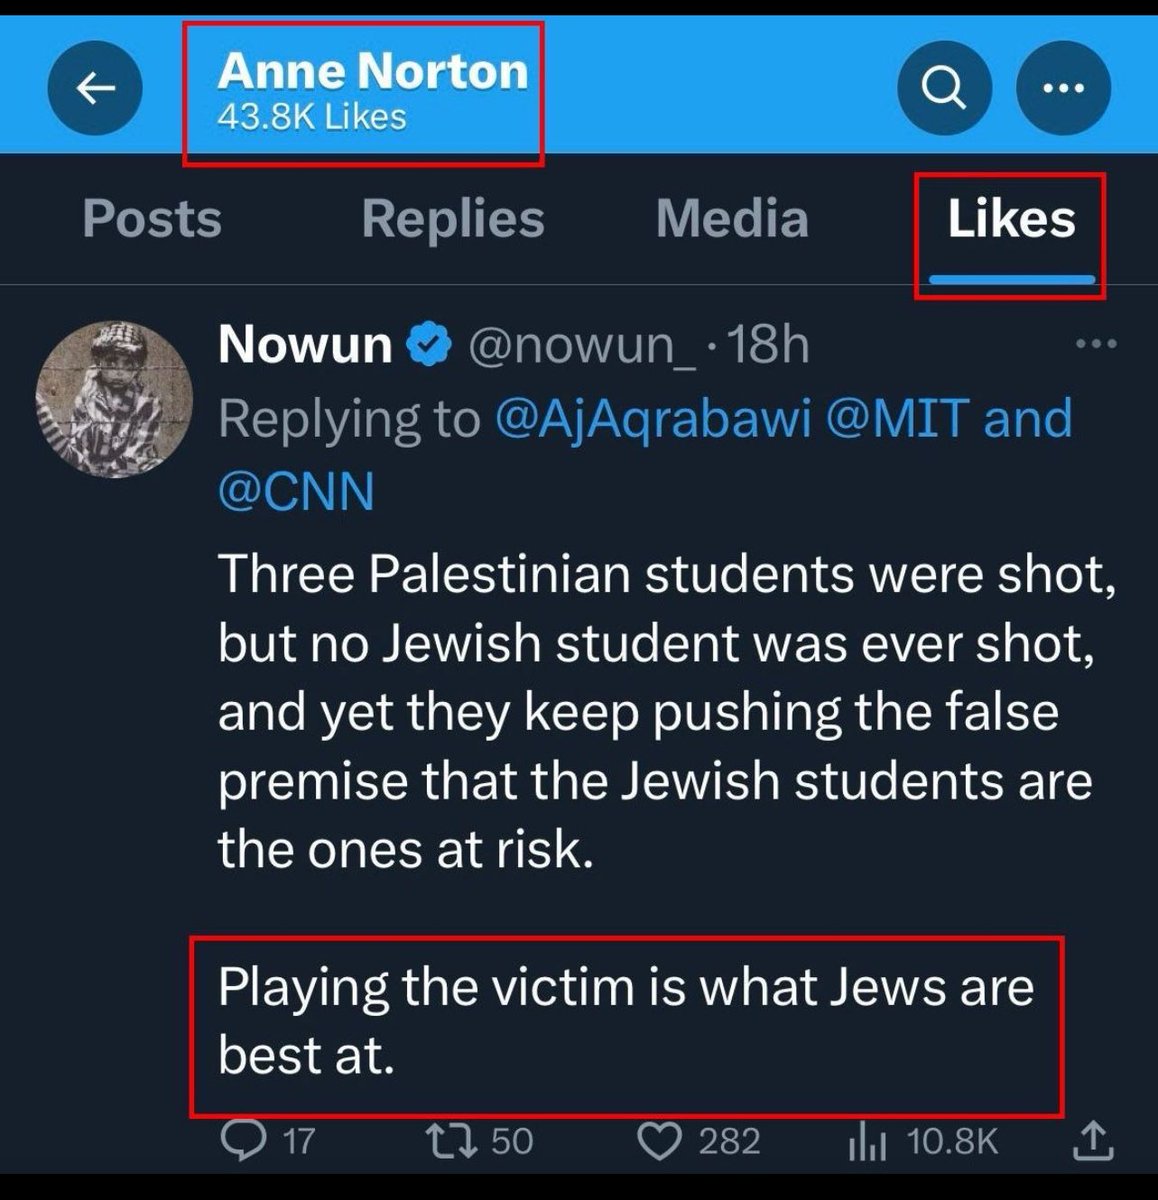 Allow me to introduce you to Prof. Anne Norton (@annenortonnow), a Distinguished Antisemitic Professor of Political Science at @Penn. Prof. Norton liked a post stating, 'Playing the victim is what Jews are best at,' referred to the brutal rape of a Jewish woman as 'alleged,' and…